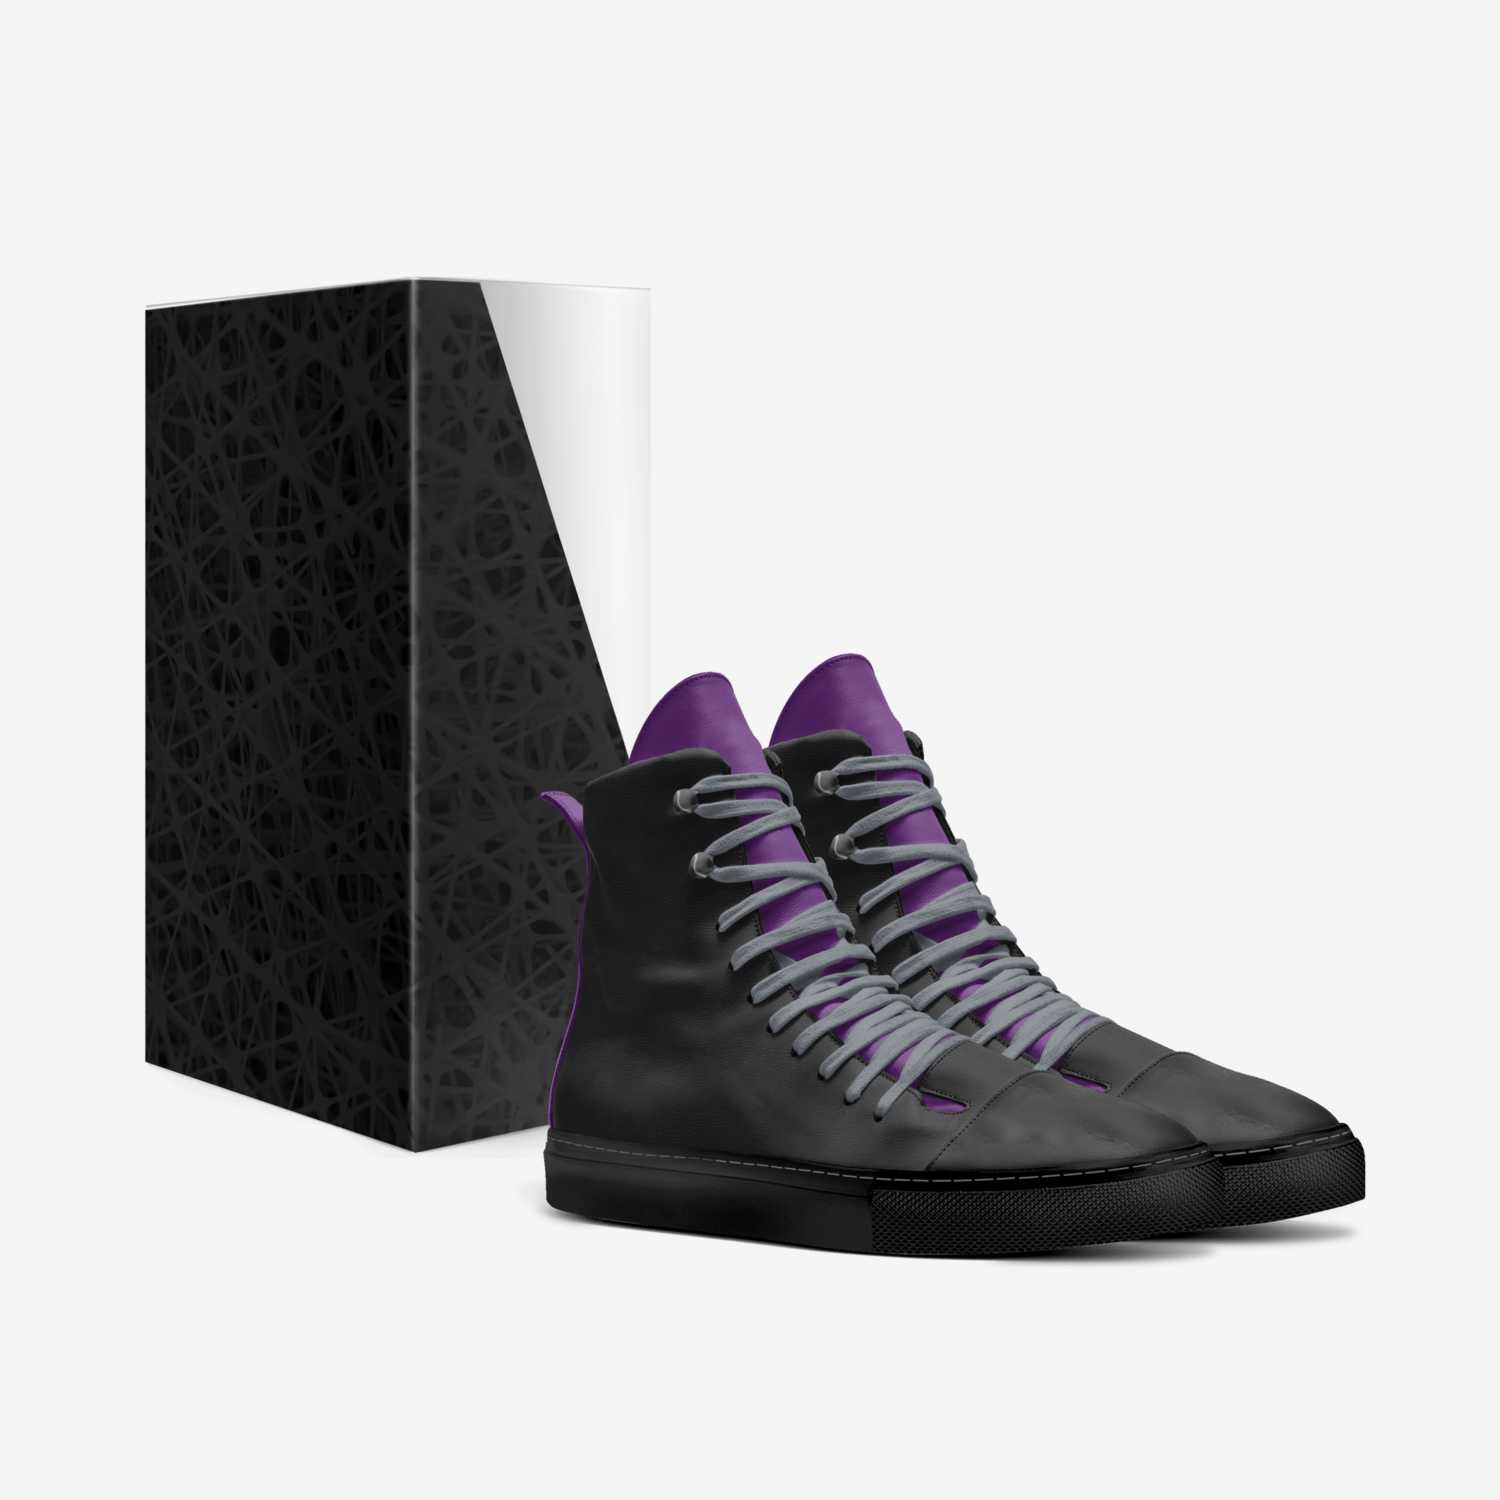 VA UNITY custom made in Italy shoes by Rodric Nave | Box view